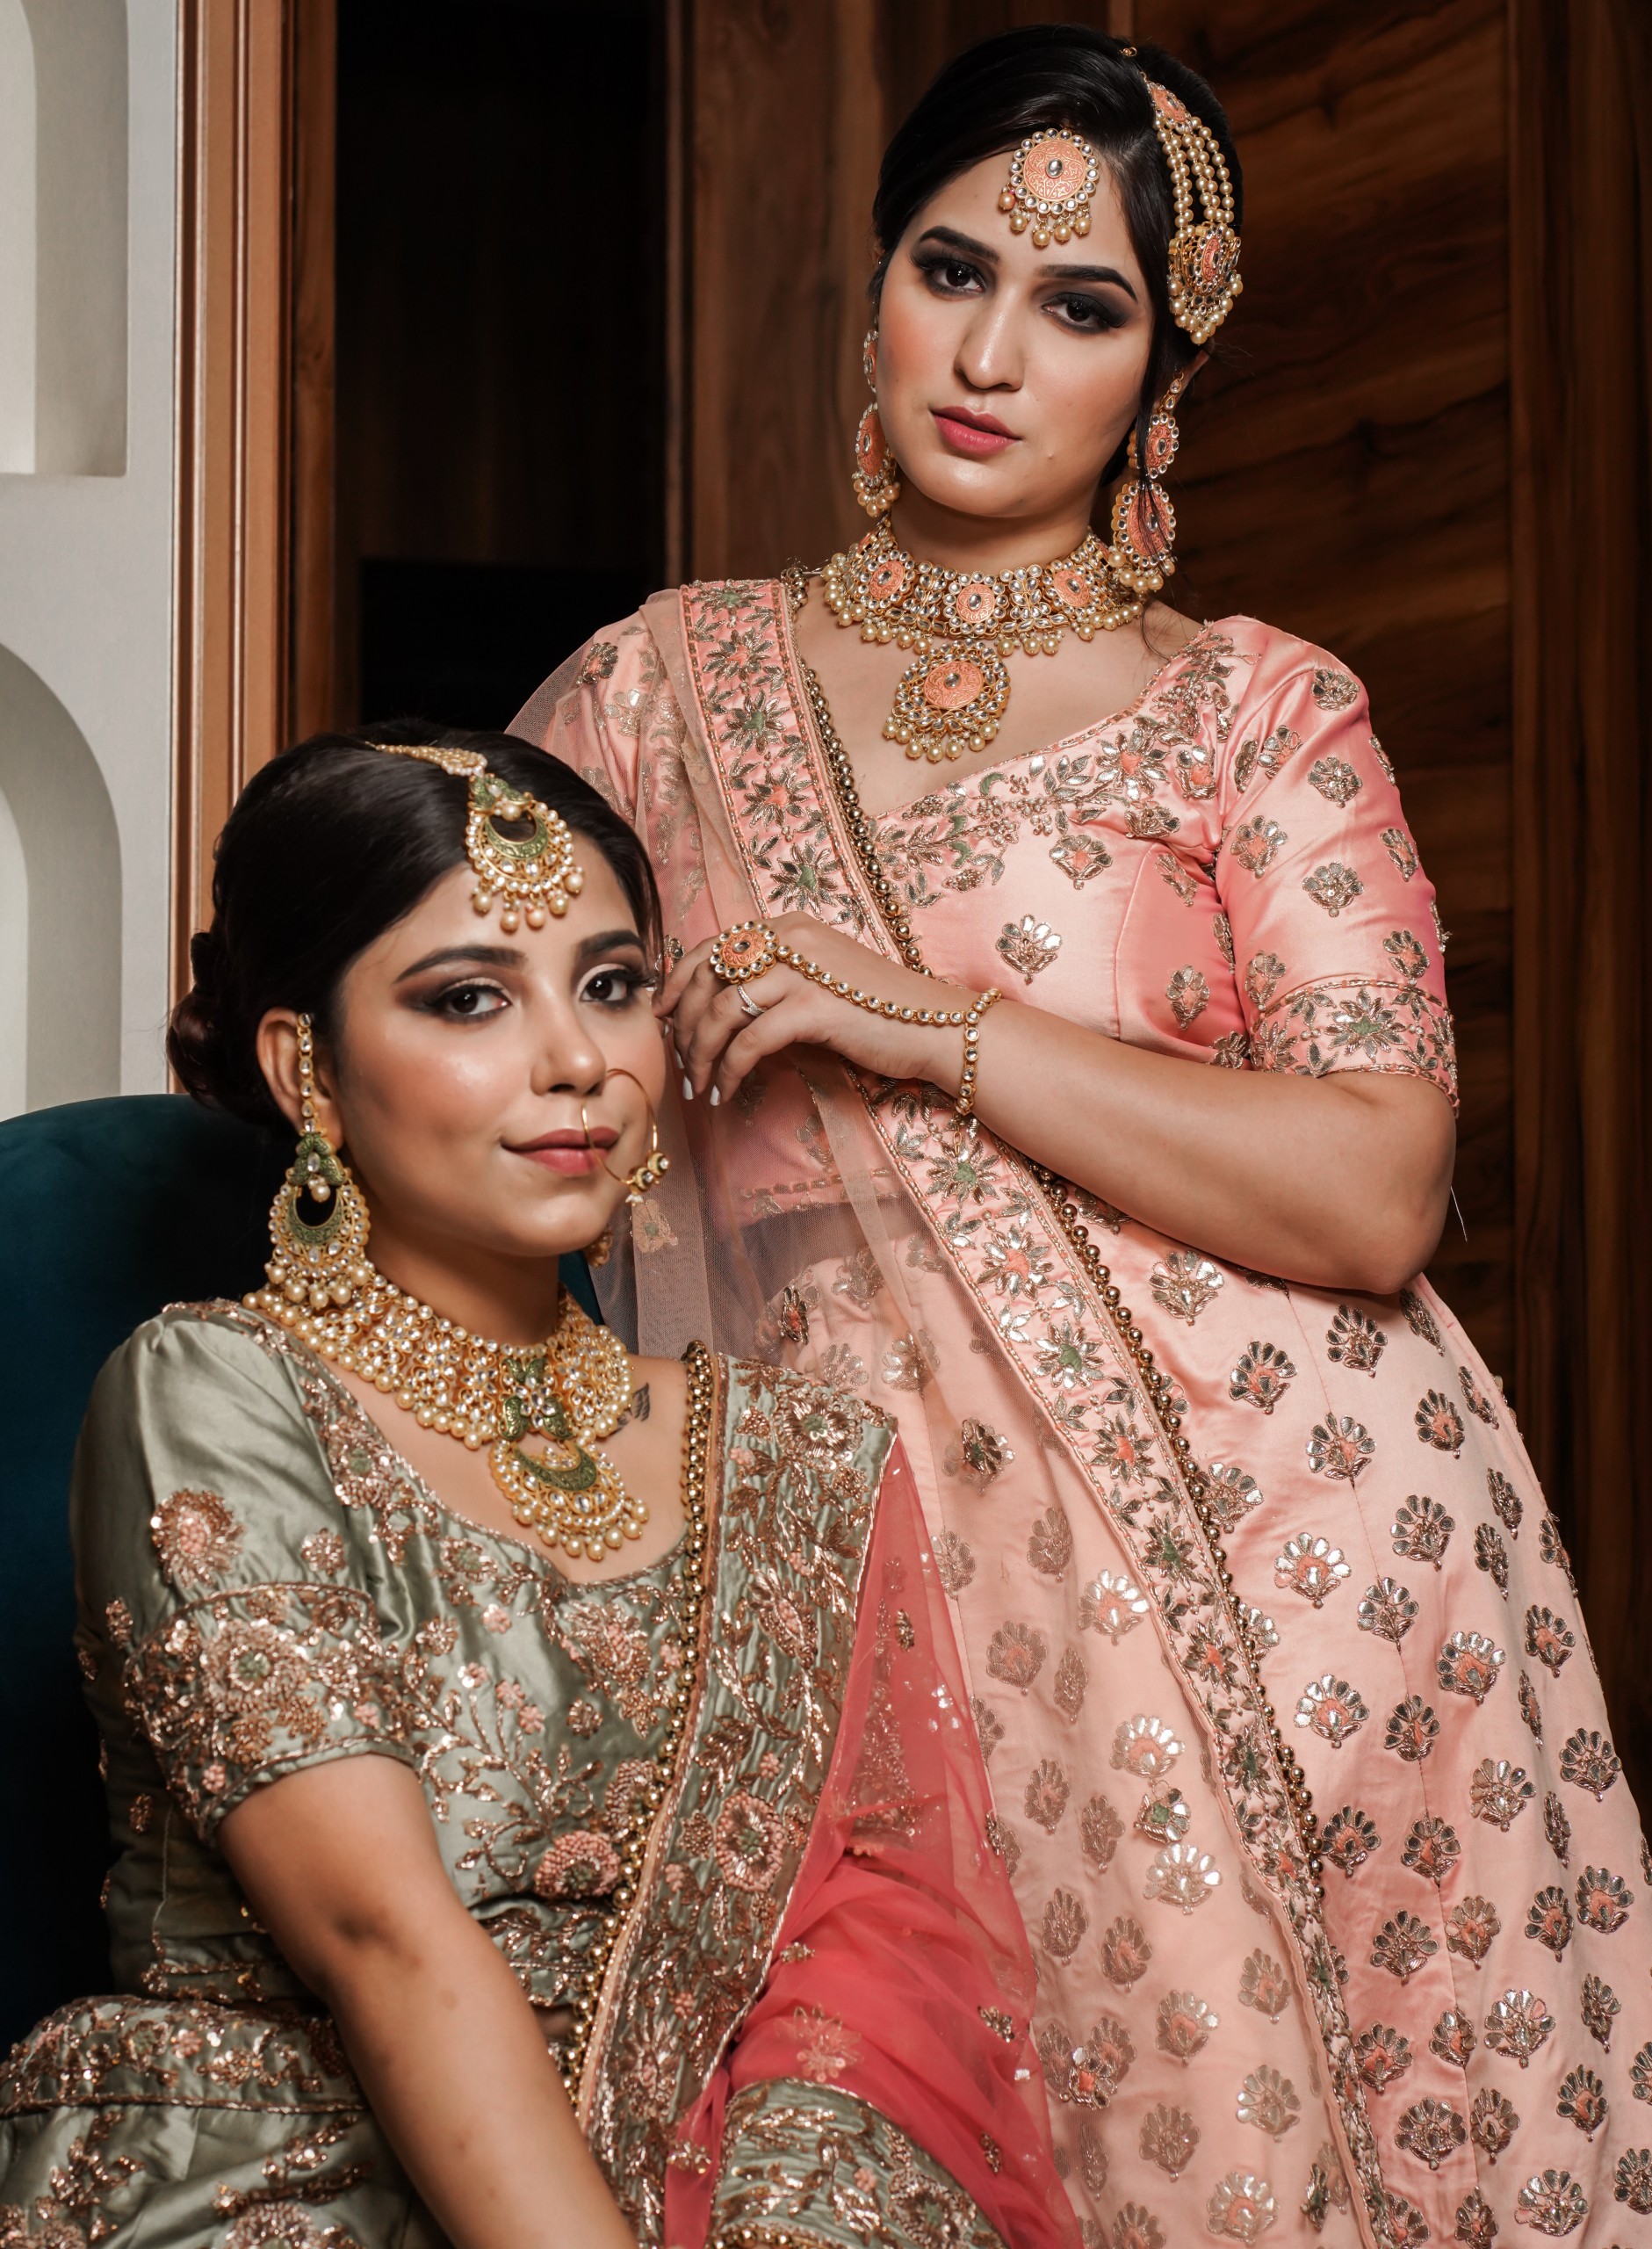 Two Beautiful Indian Model with jewelry and perfect makeup